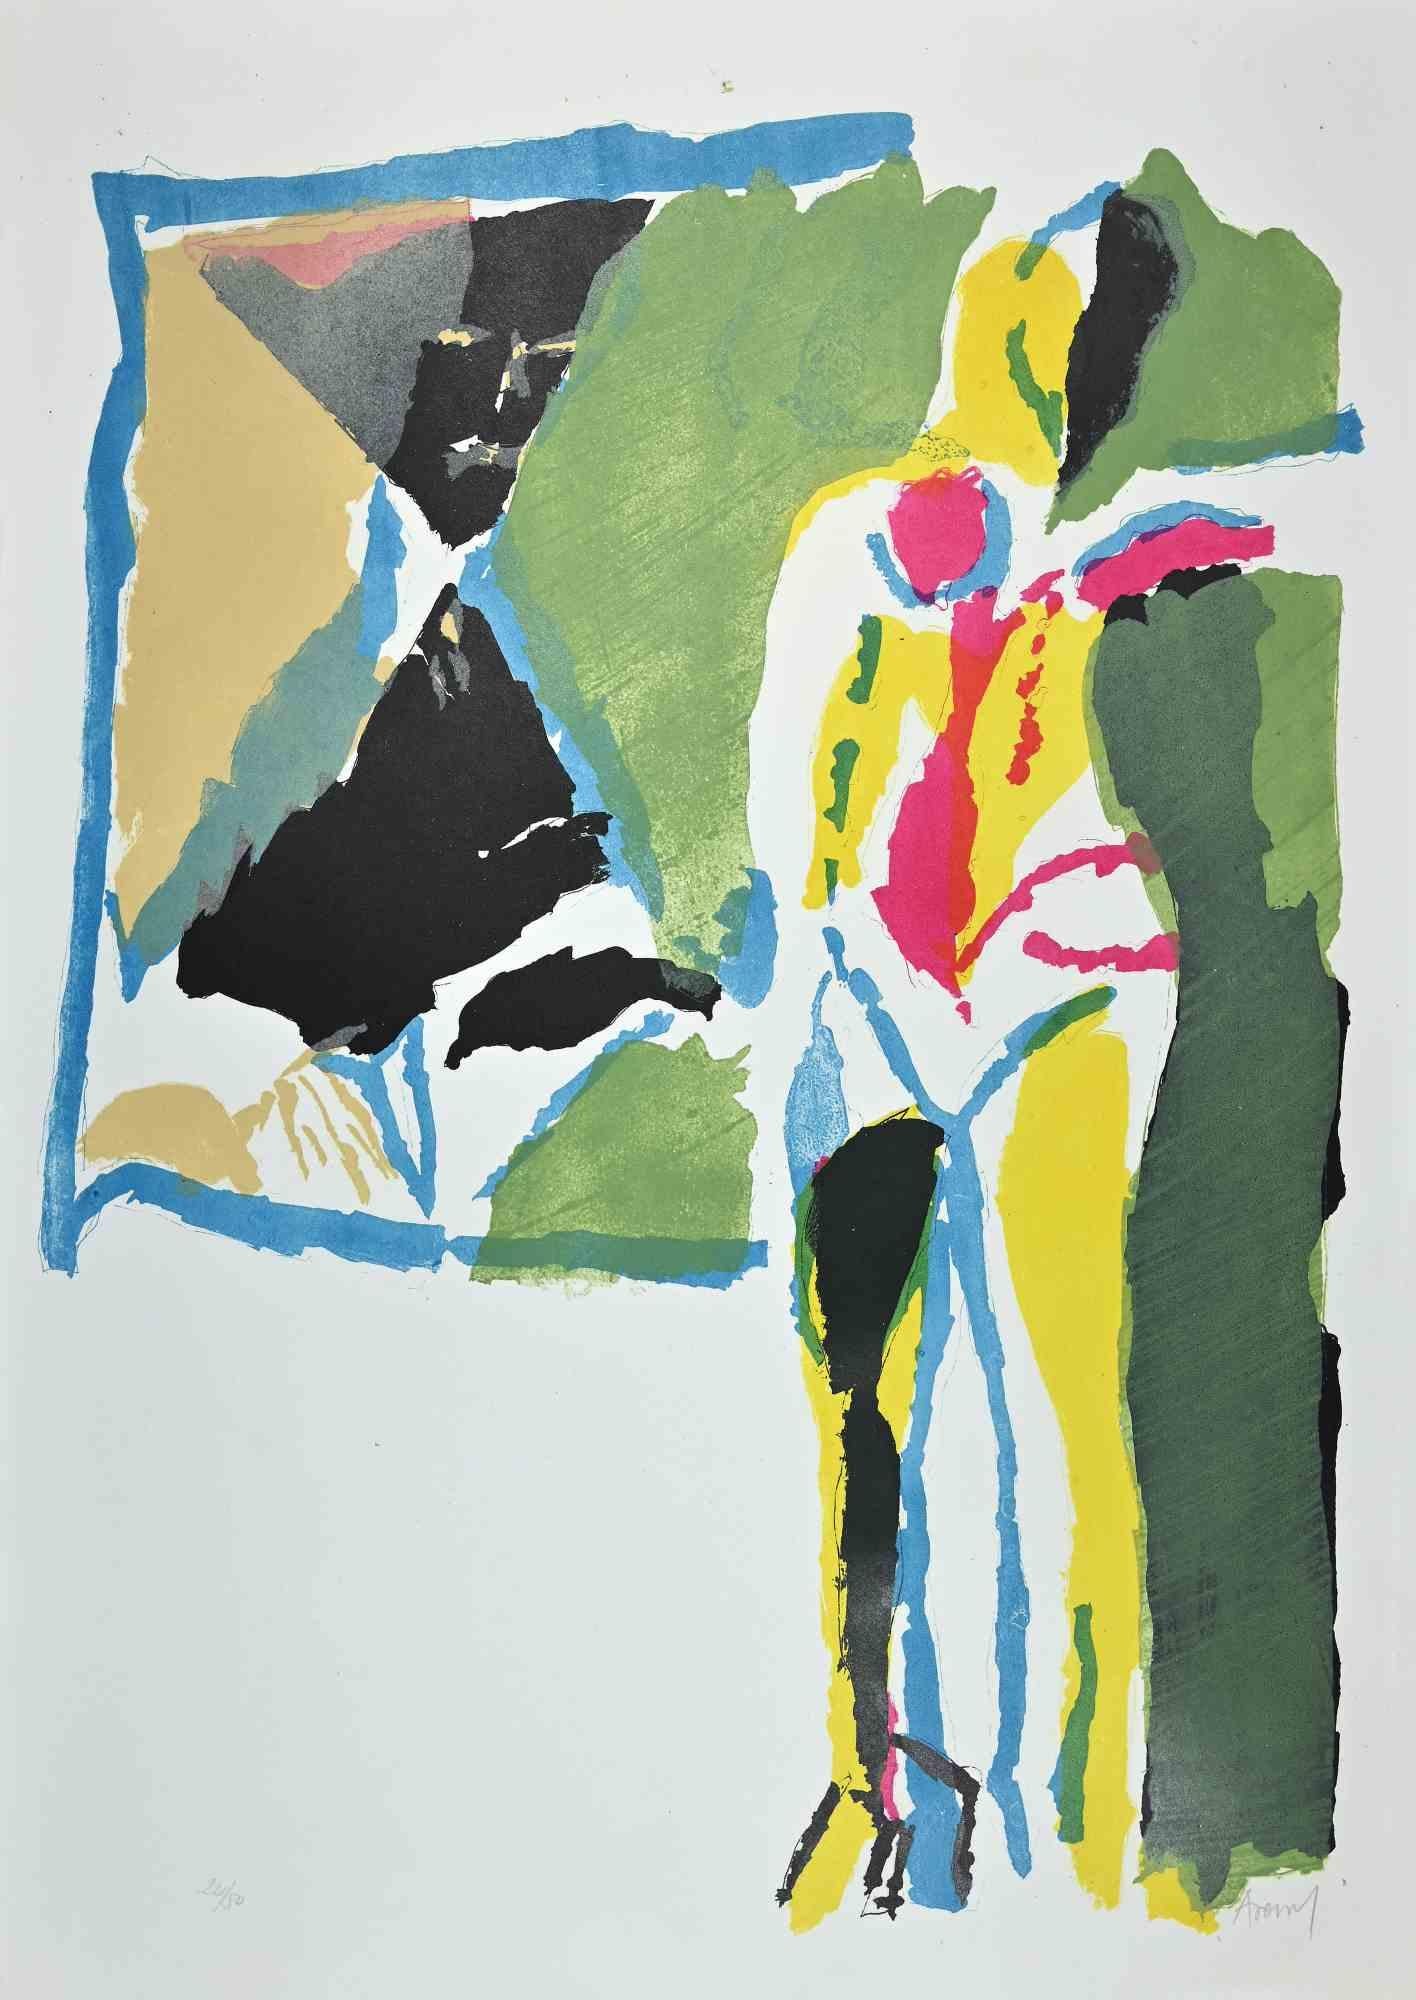 Marcello Avenali Abstract Print - Asymmetric Abstract Composition - Lithograph by M. Avenali - 1960s